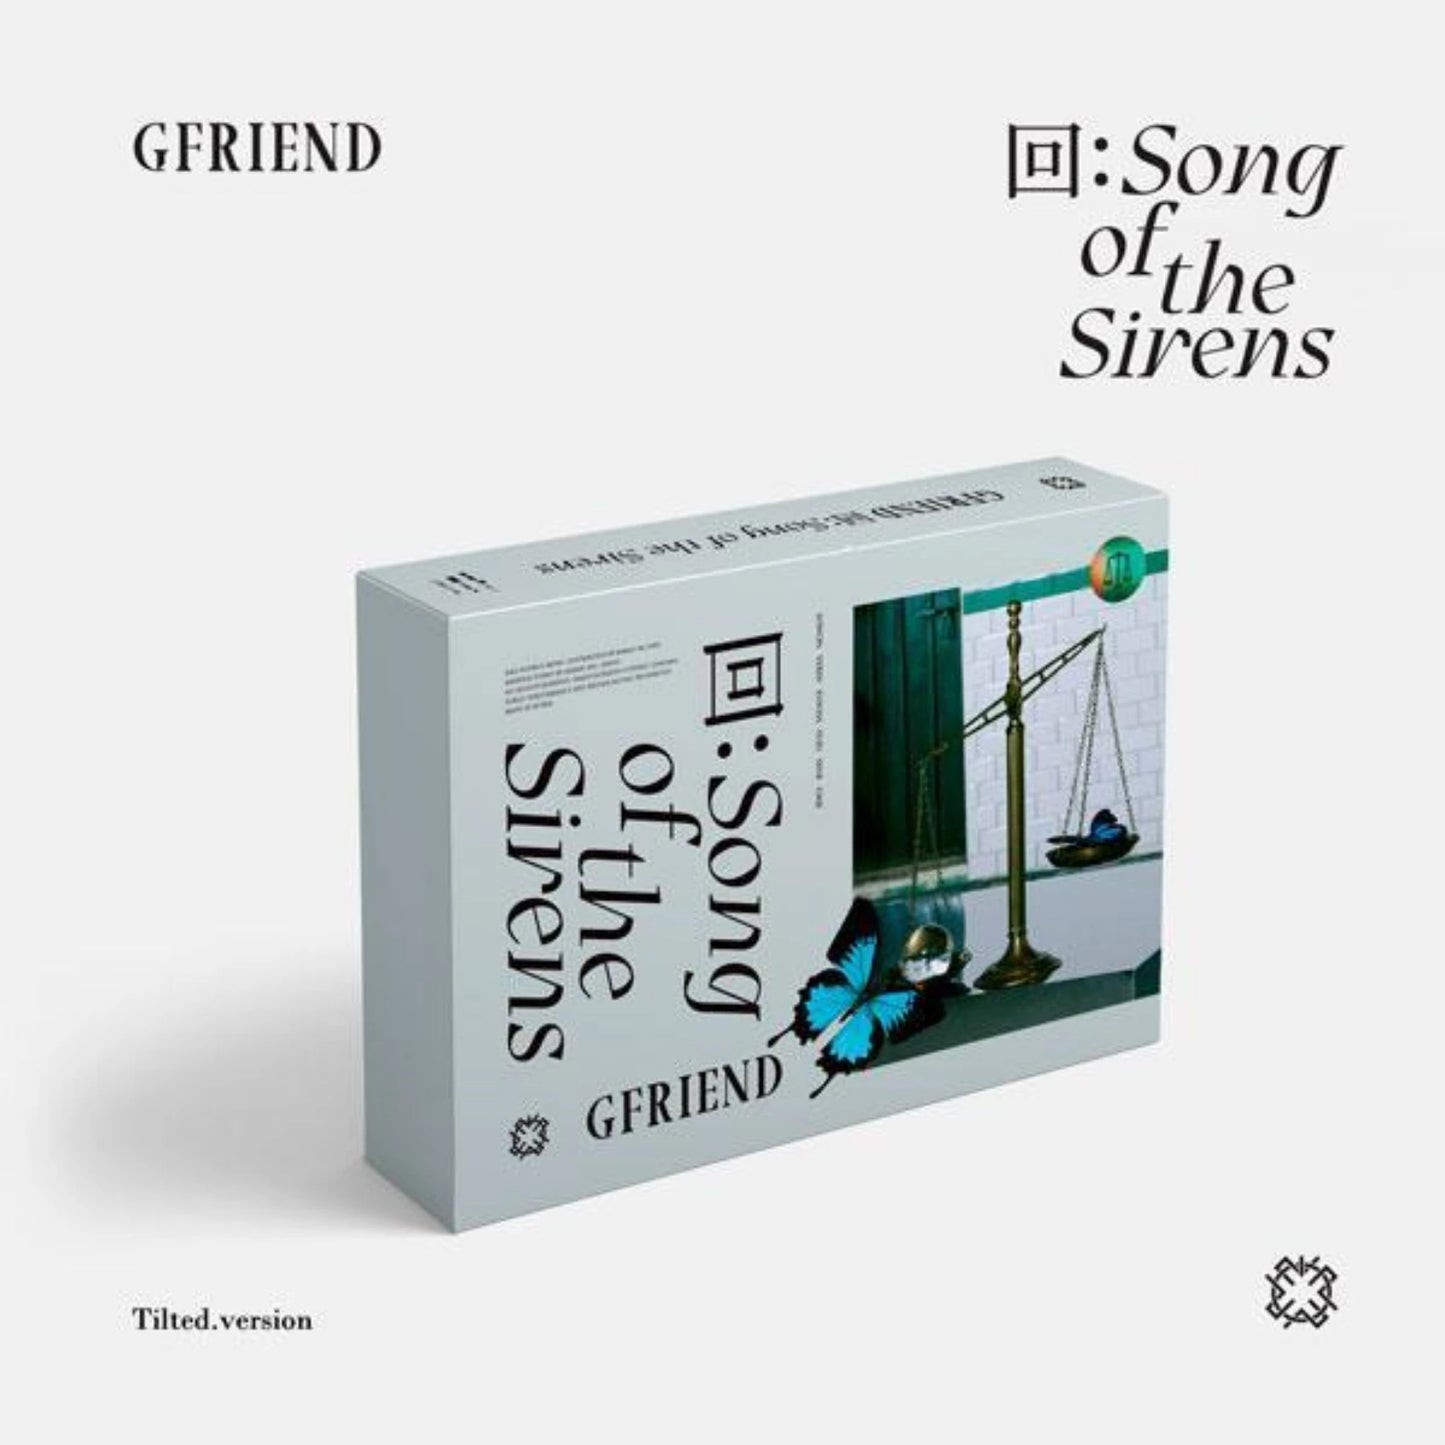 GFRIEND - 回:SONG OF THE SIRENS (3 VERSIONS)